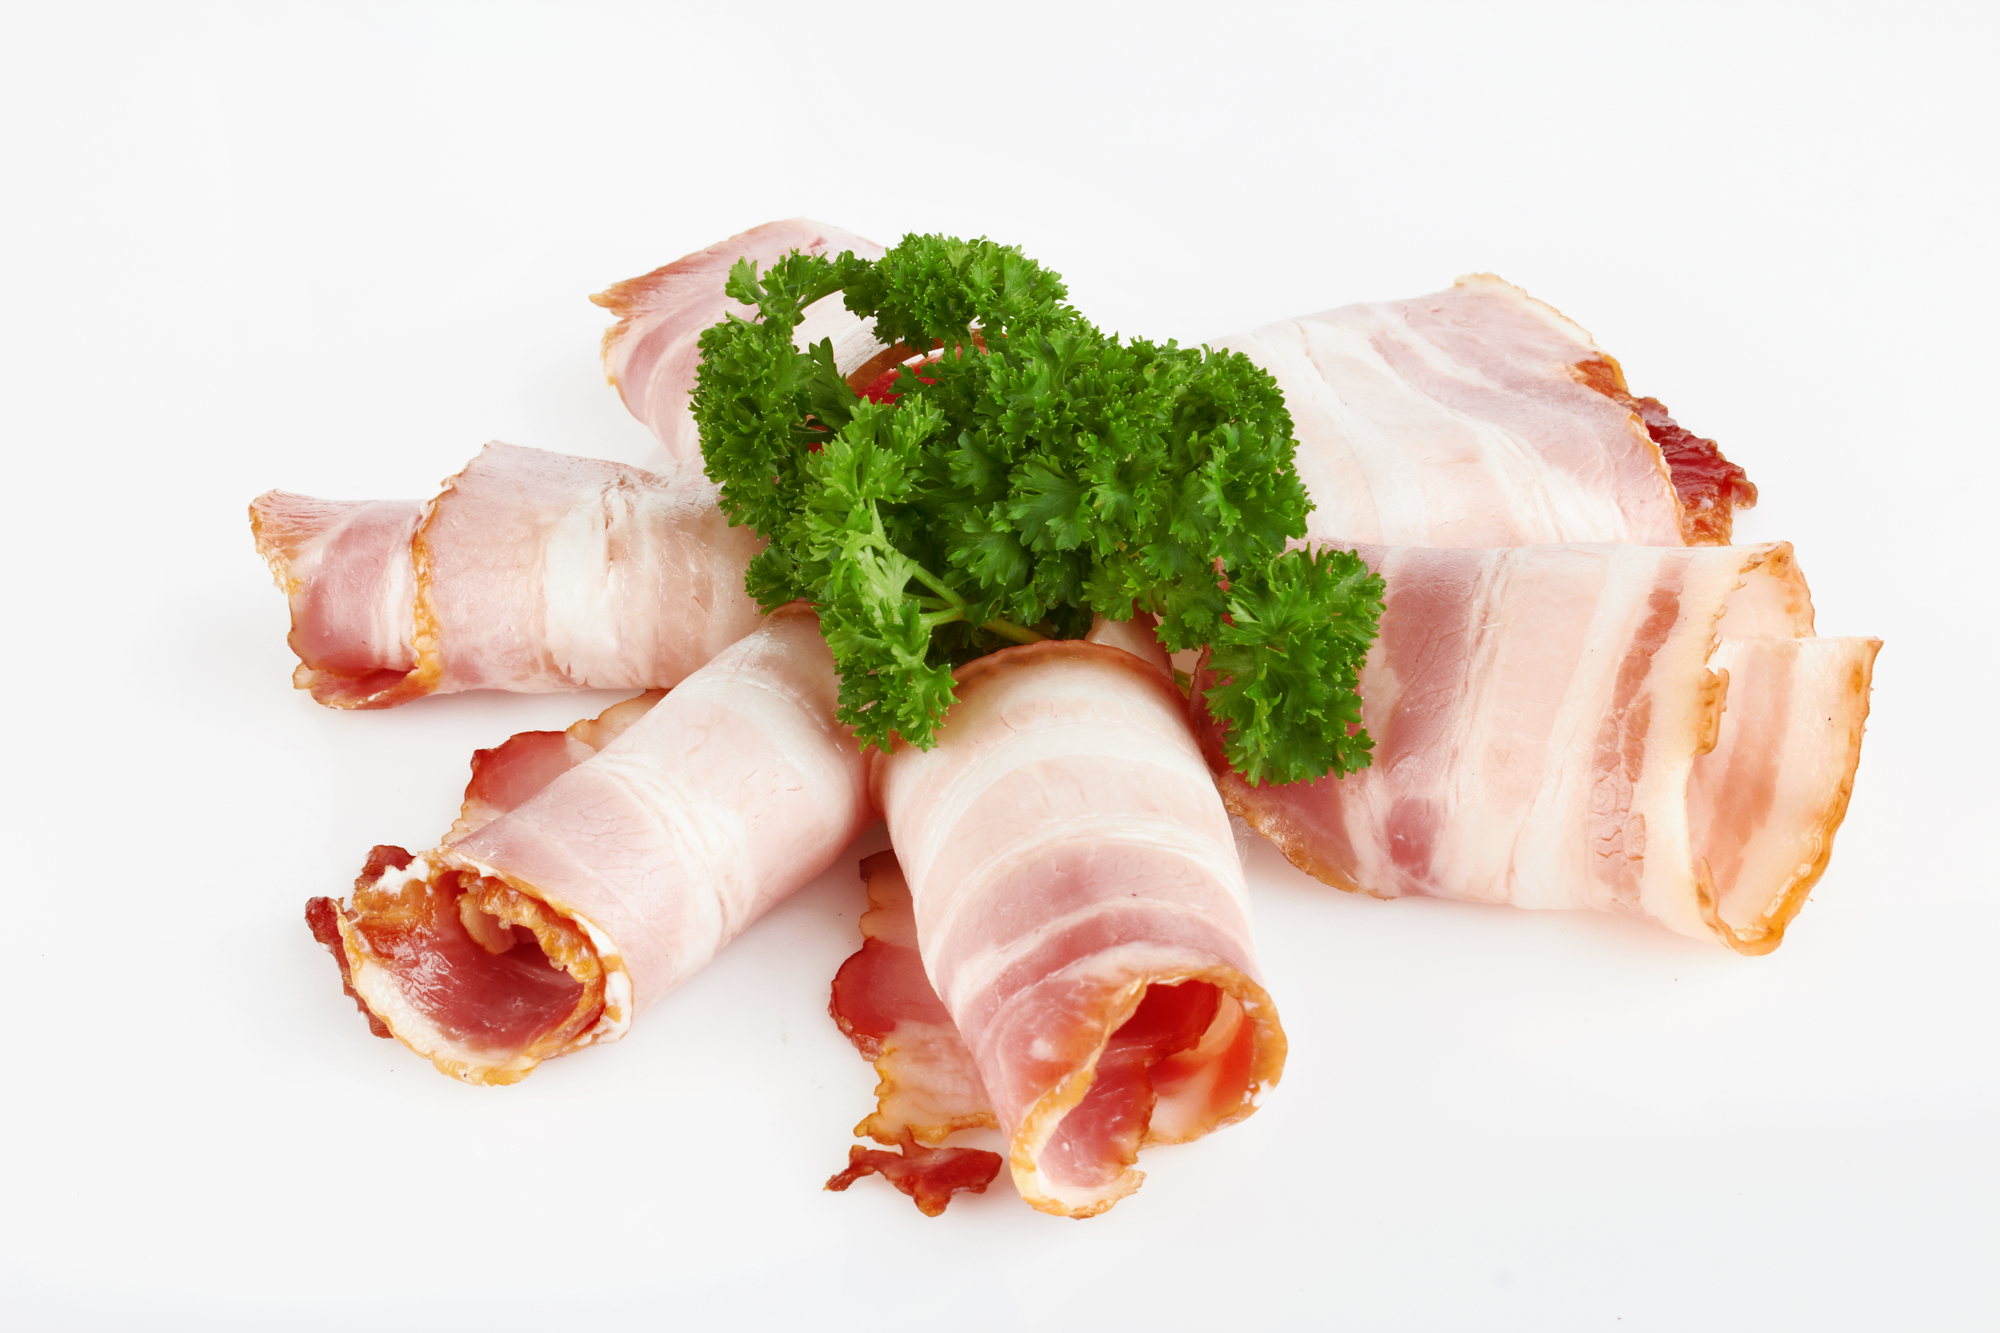 sliced smoked bacon on white background